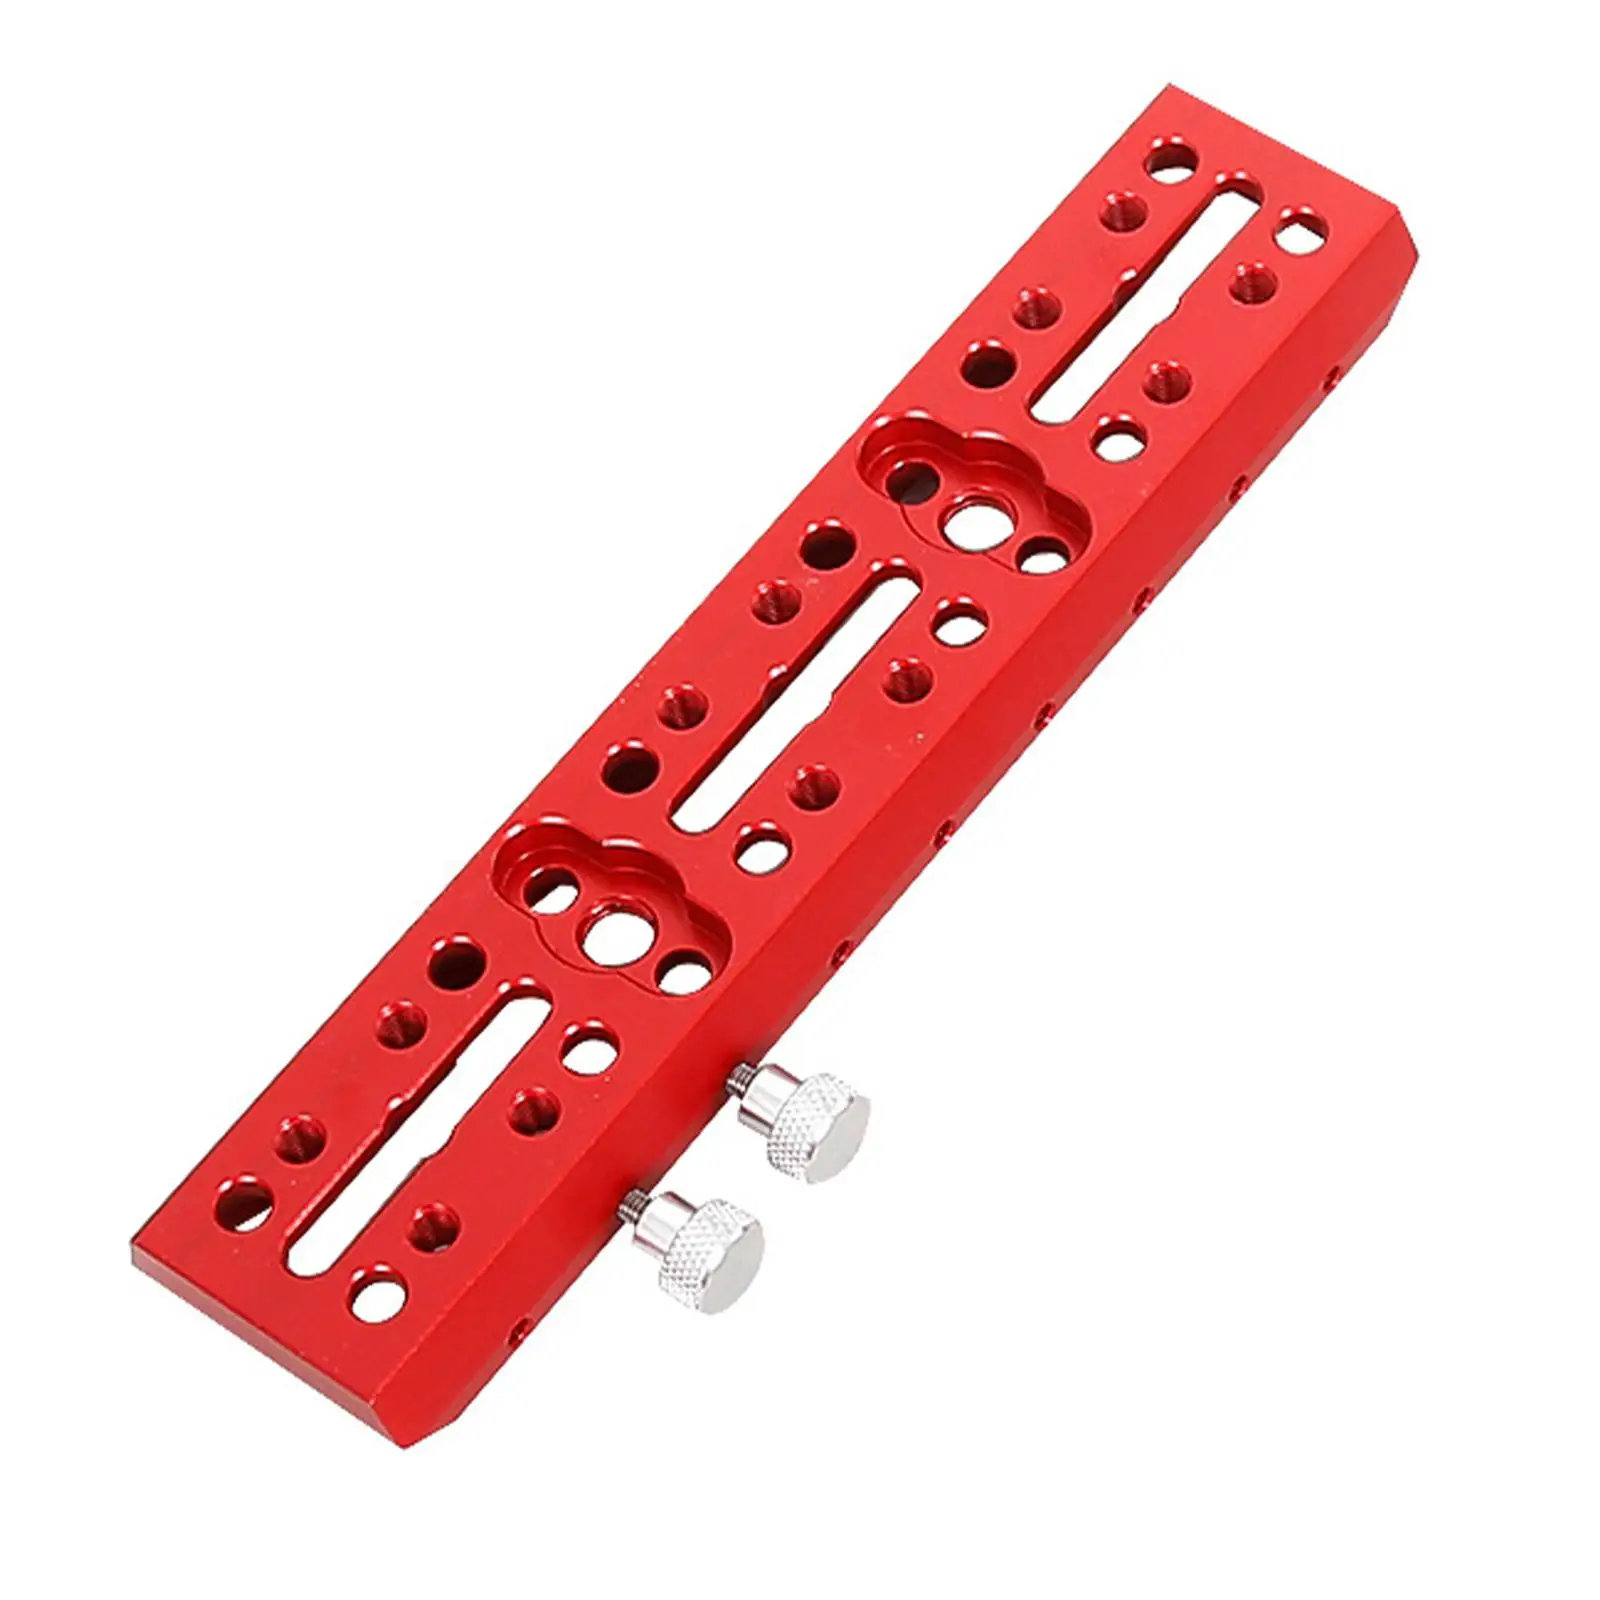 Telescope Dovetail Mounting Plate Rail Bar Mounting Plate for 2042 Sturdy